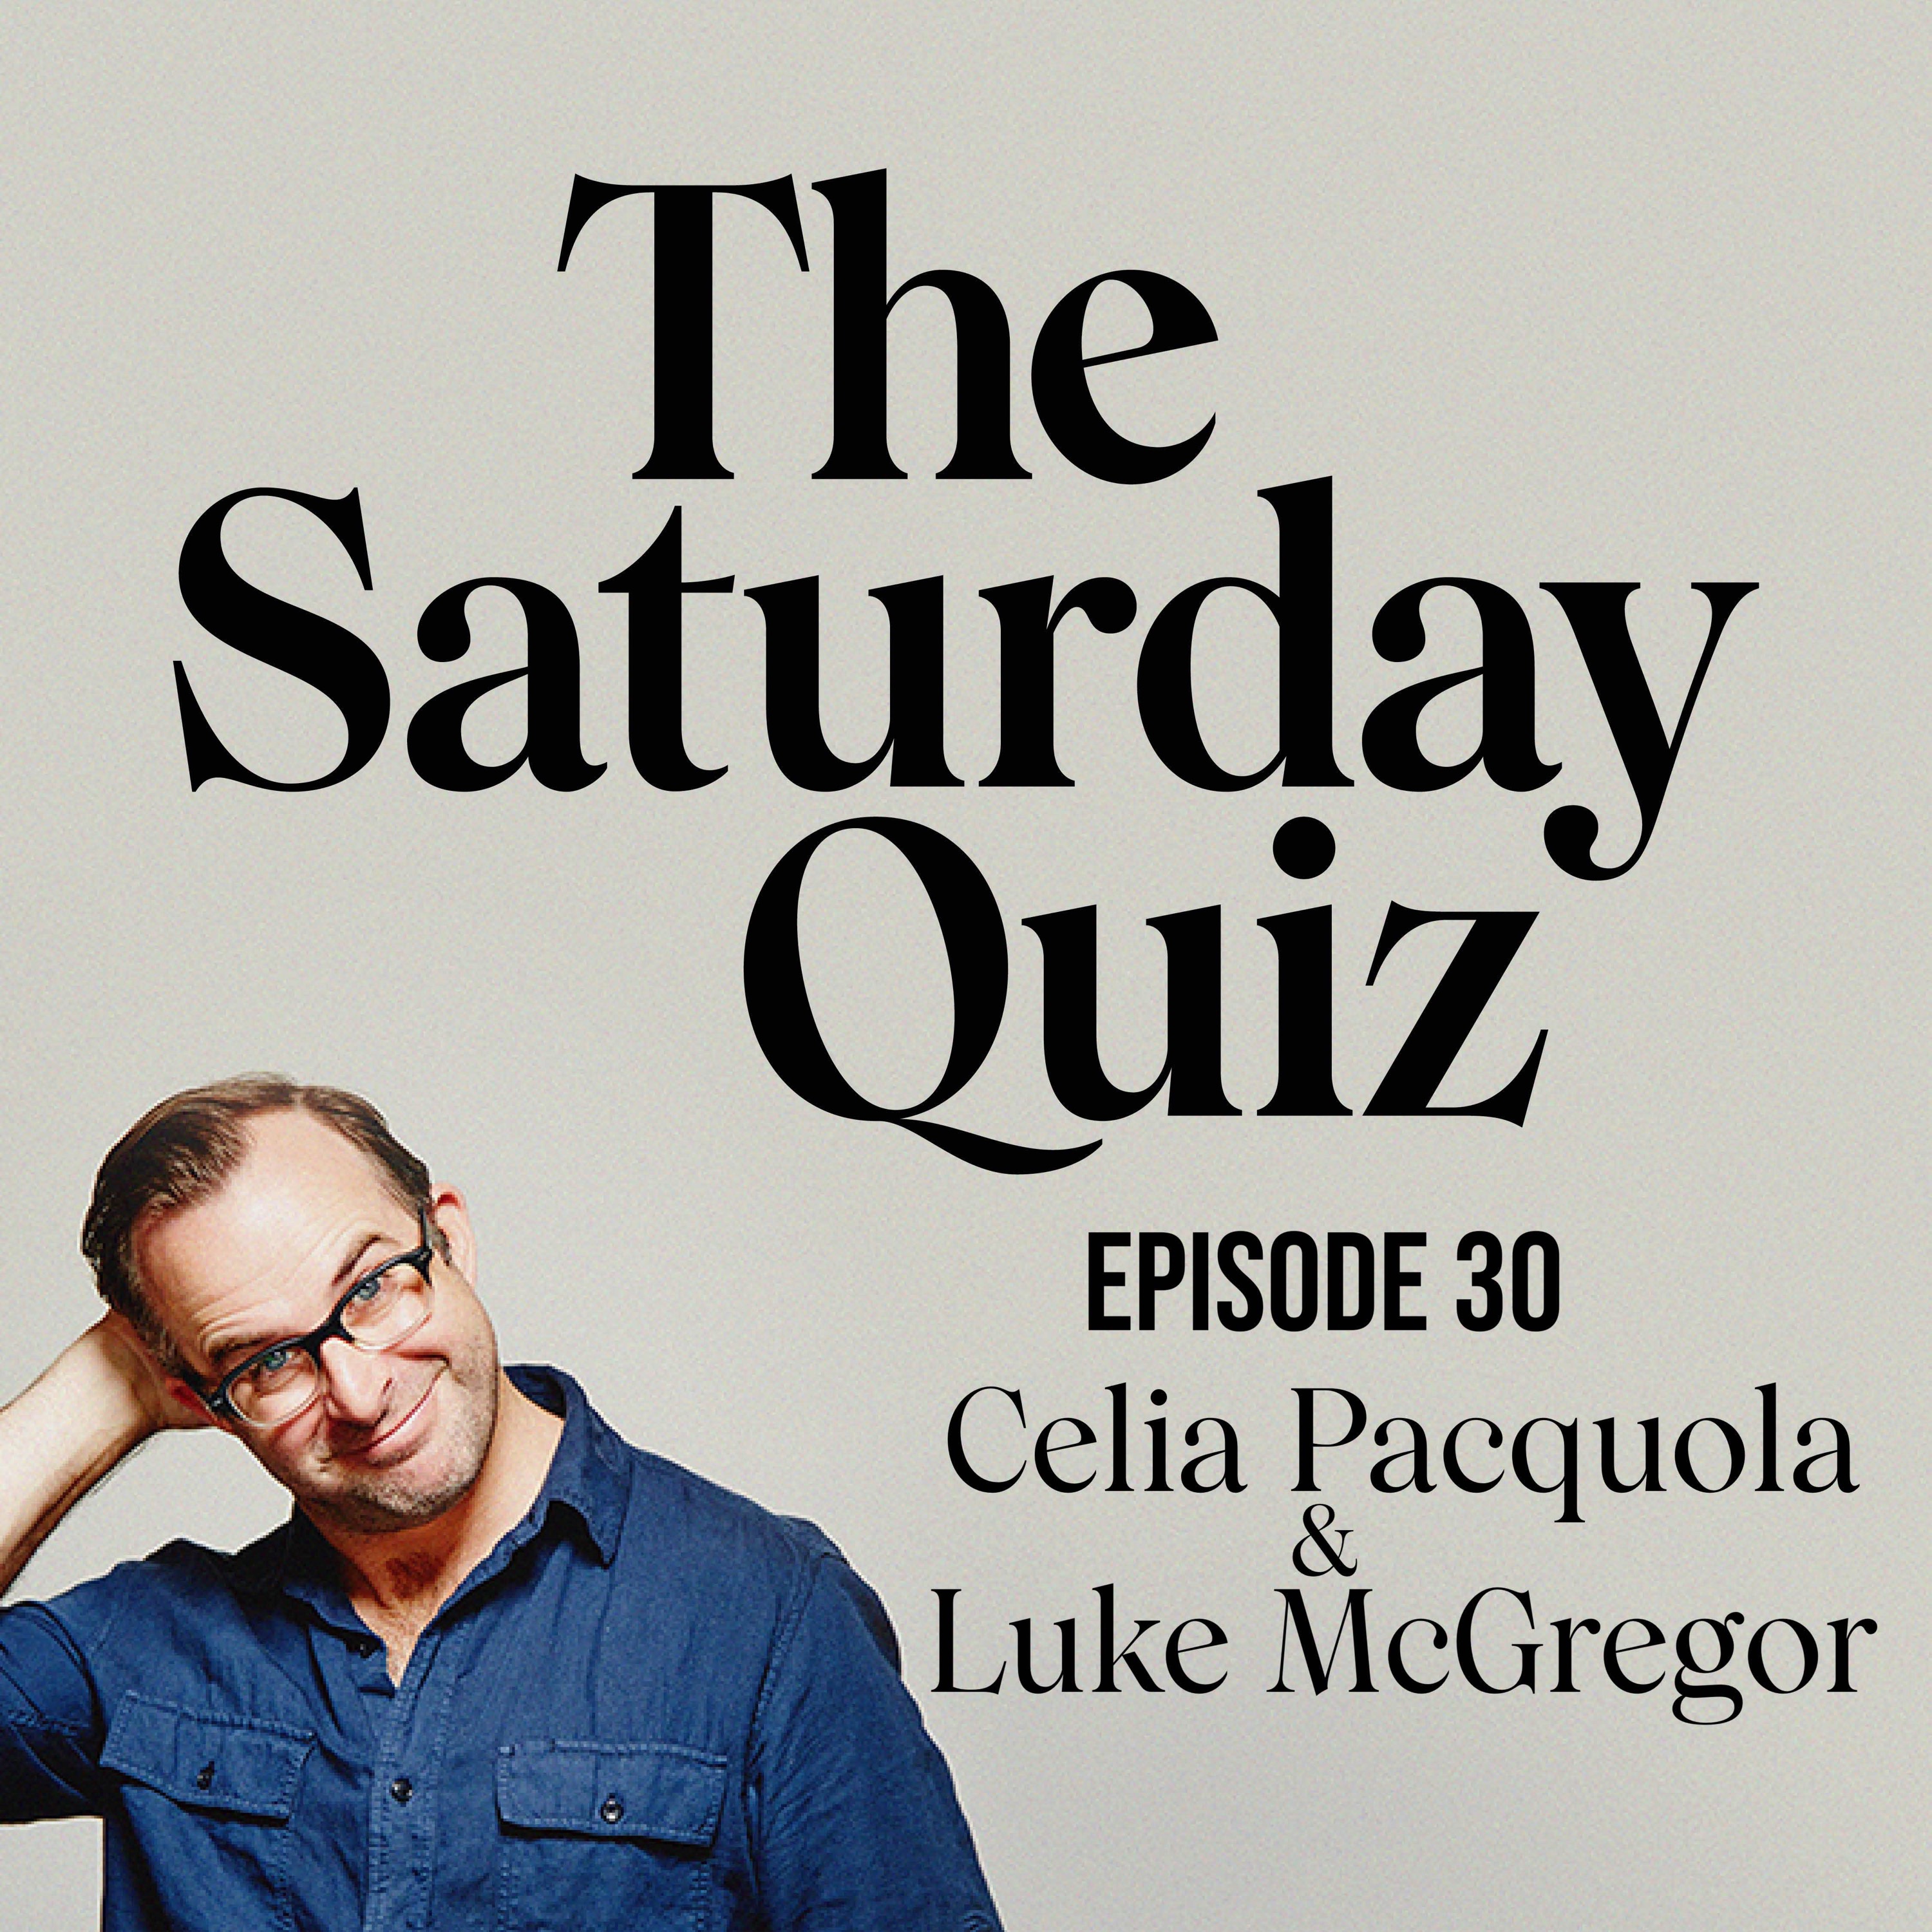 Back Again, Again with Celia Pacquola and Luke McGregor